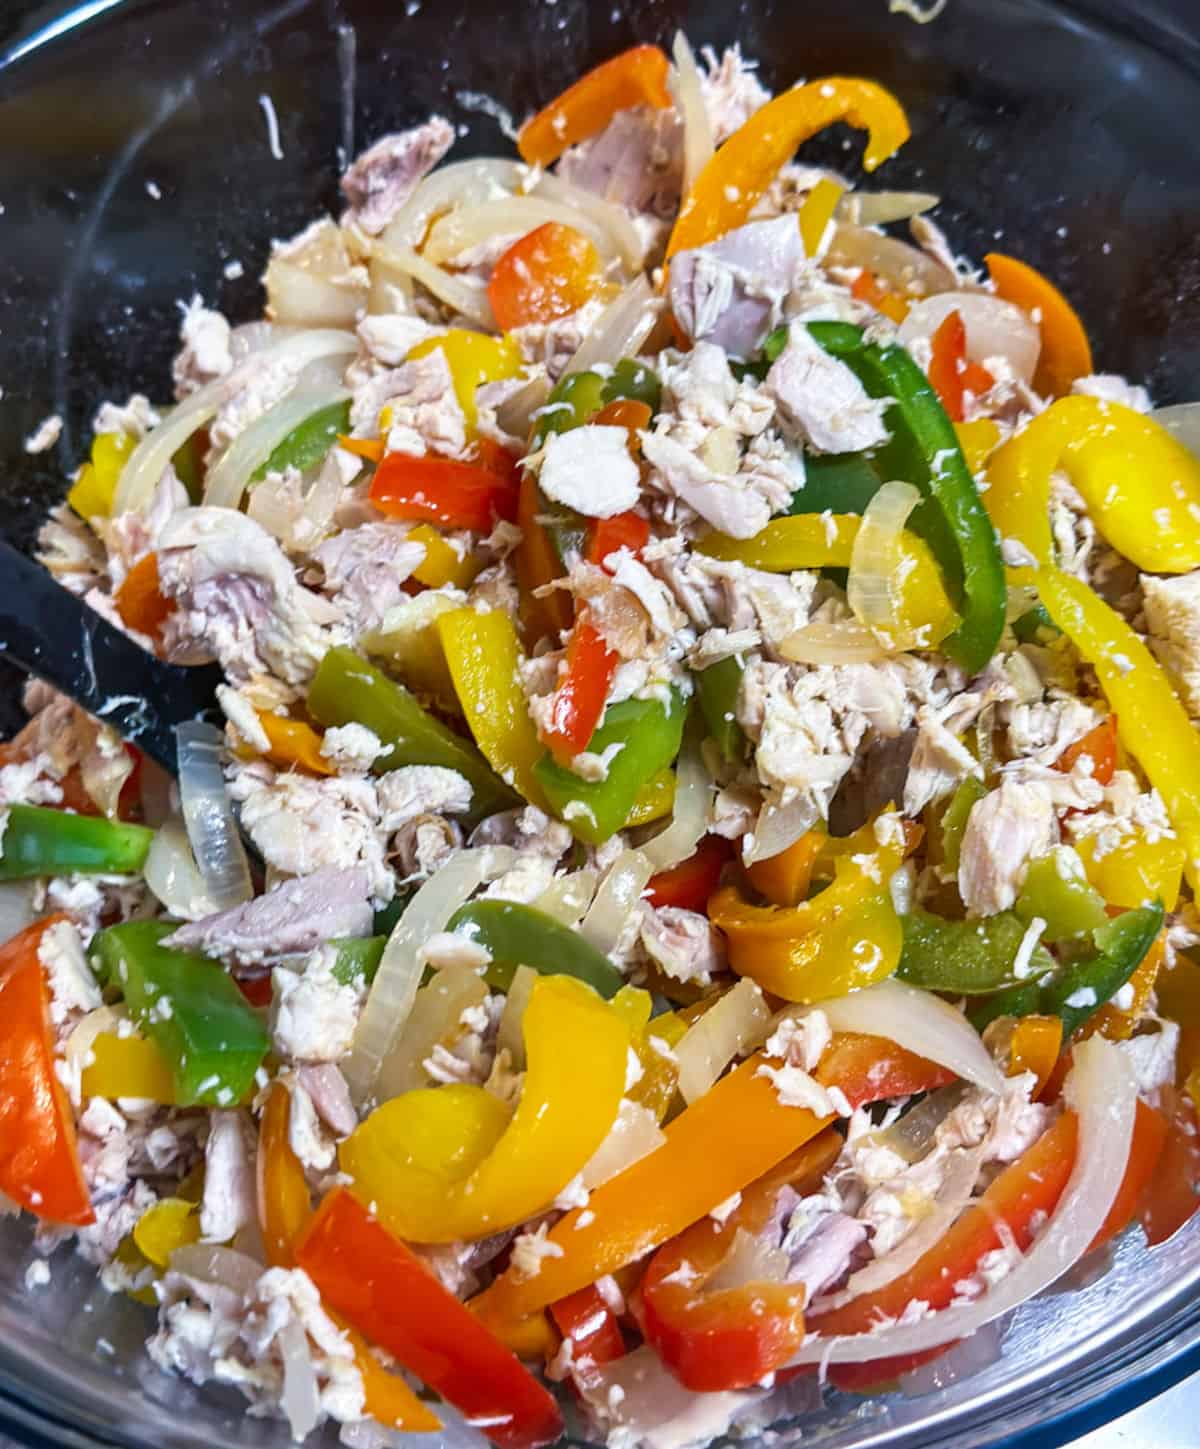 Shredded chicken is mixed with sauteed onions and bell peppers of all colors in a glass bowl for the second step in the recipe.